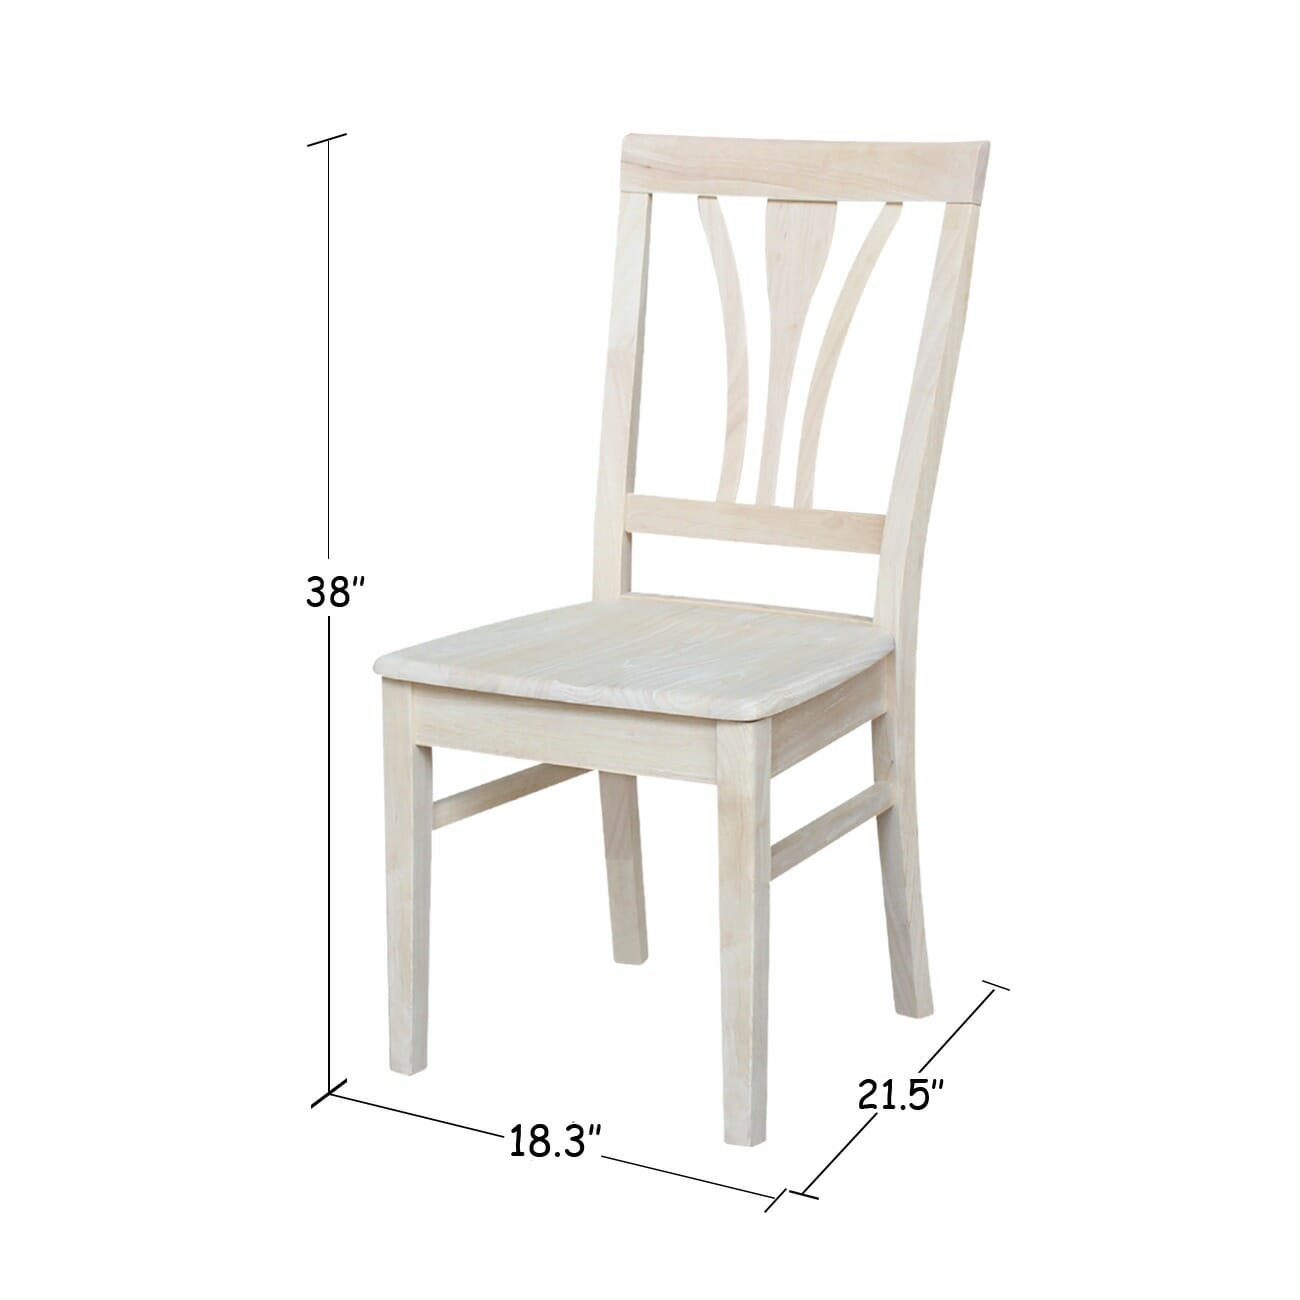 C-918 Fan Back Chair 2-pack w/FREE SHIPPING | Unfinished Furniture of ...